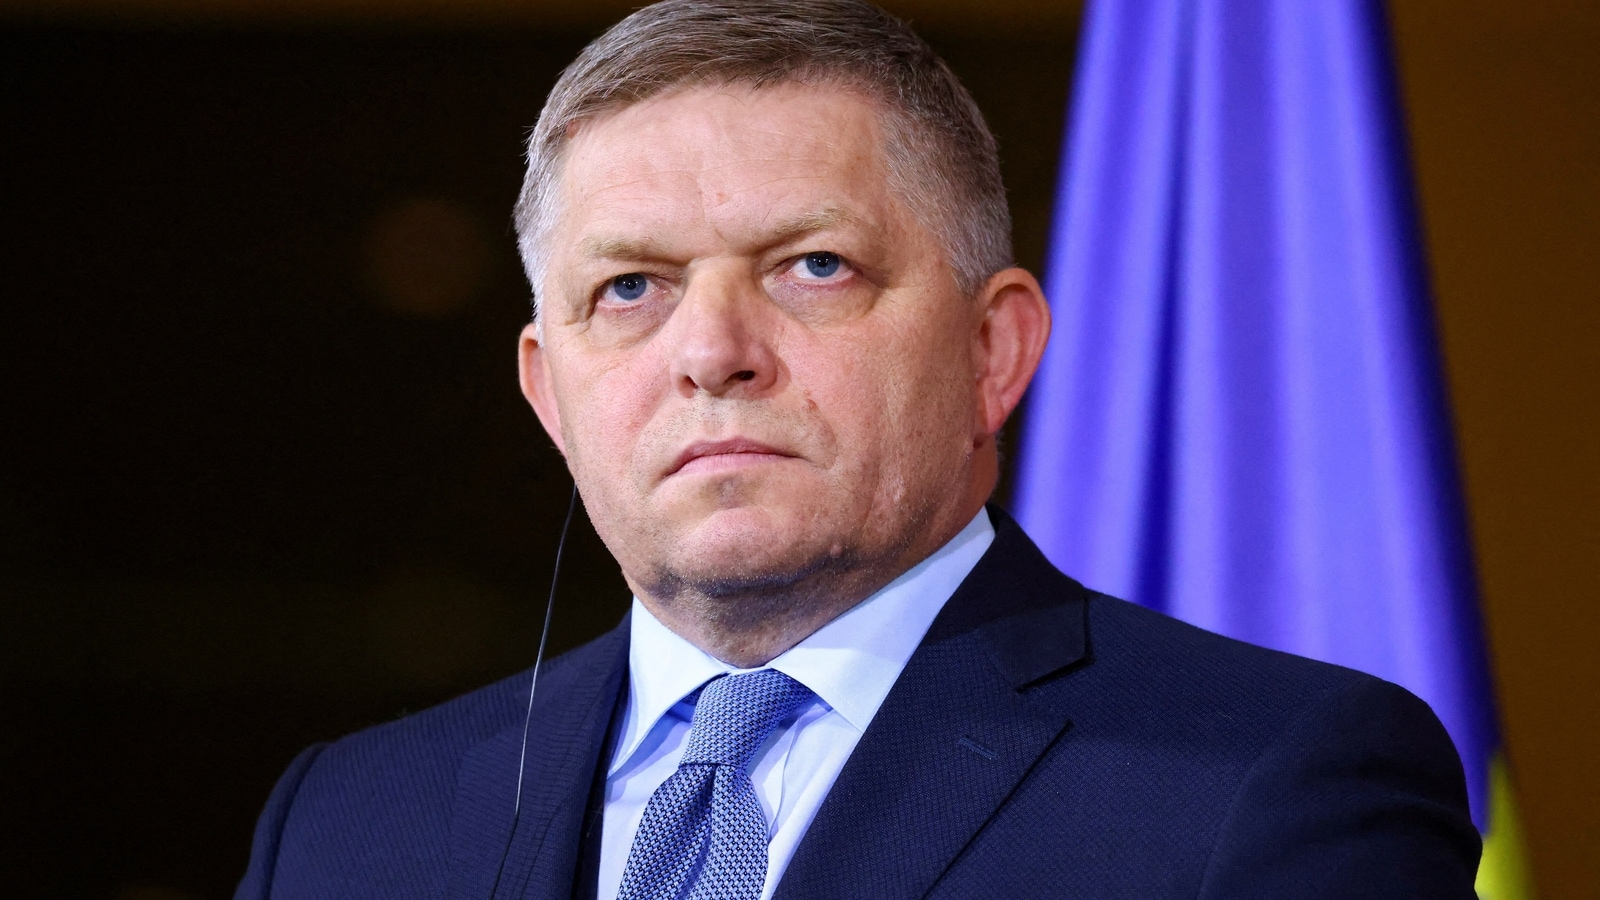 Slovak PM Robert Fico expected to survive assassination attempt, says deputy